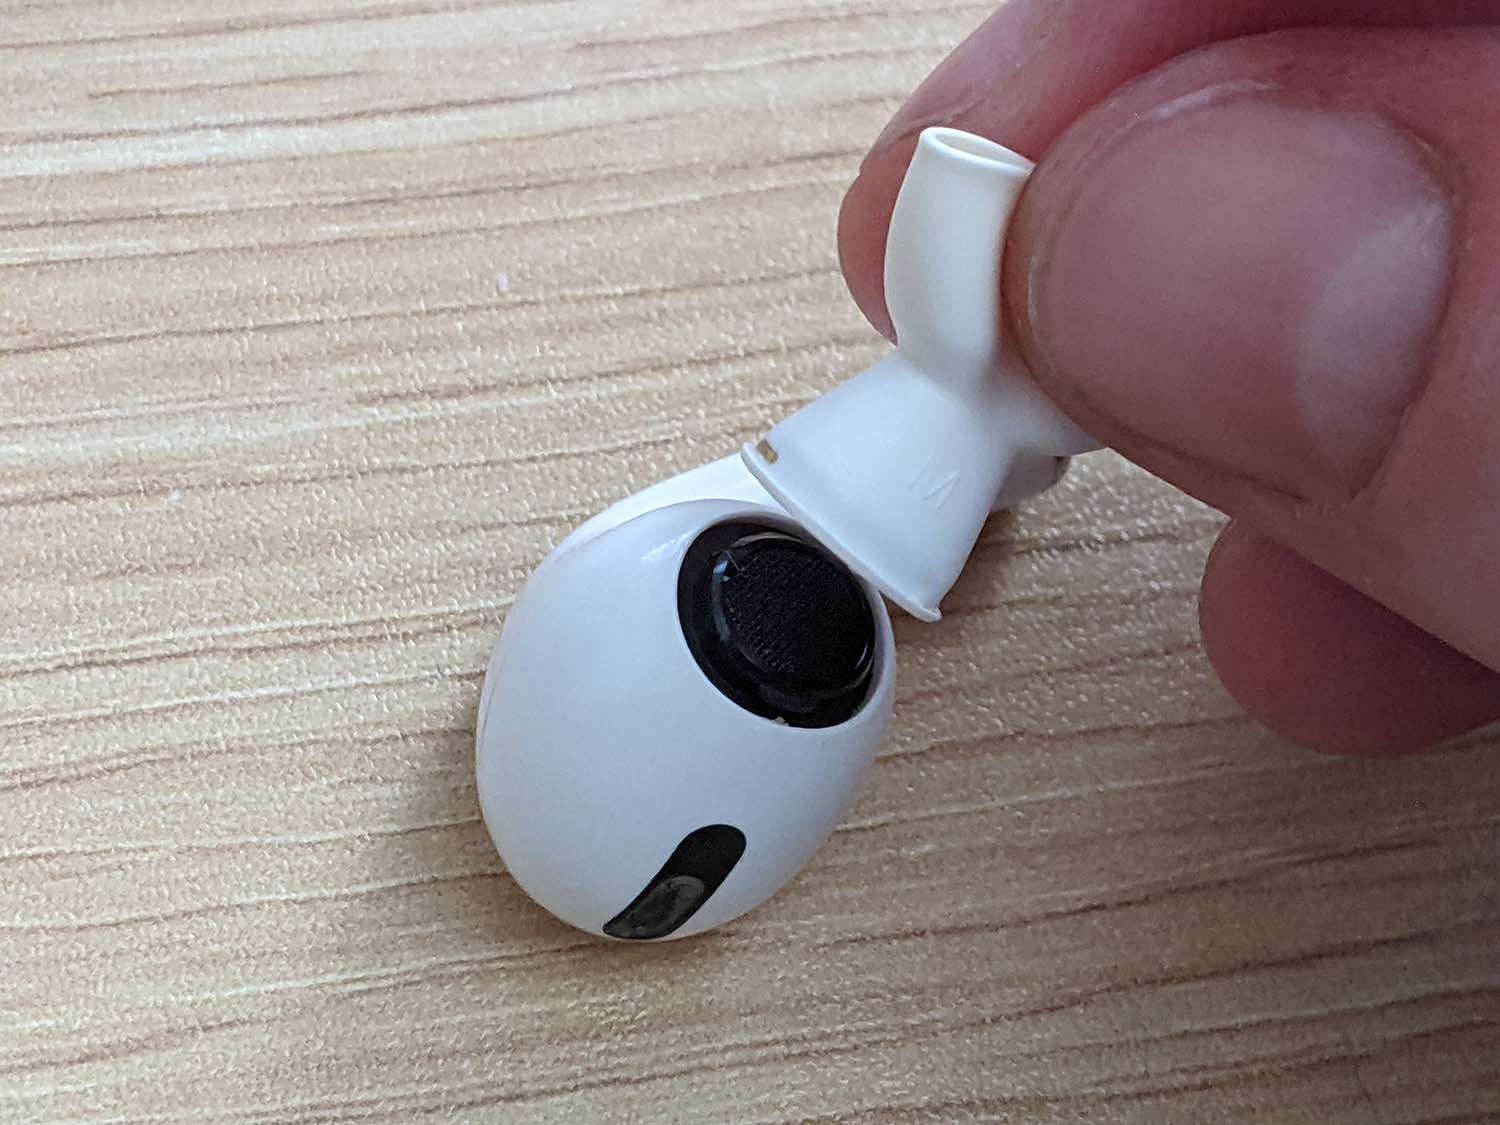 How To Change Ear Tips On Airpods Pro